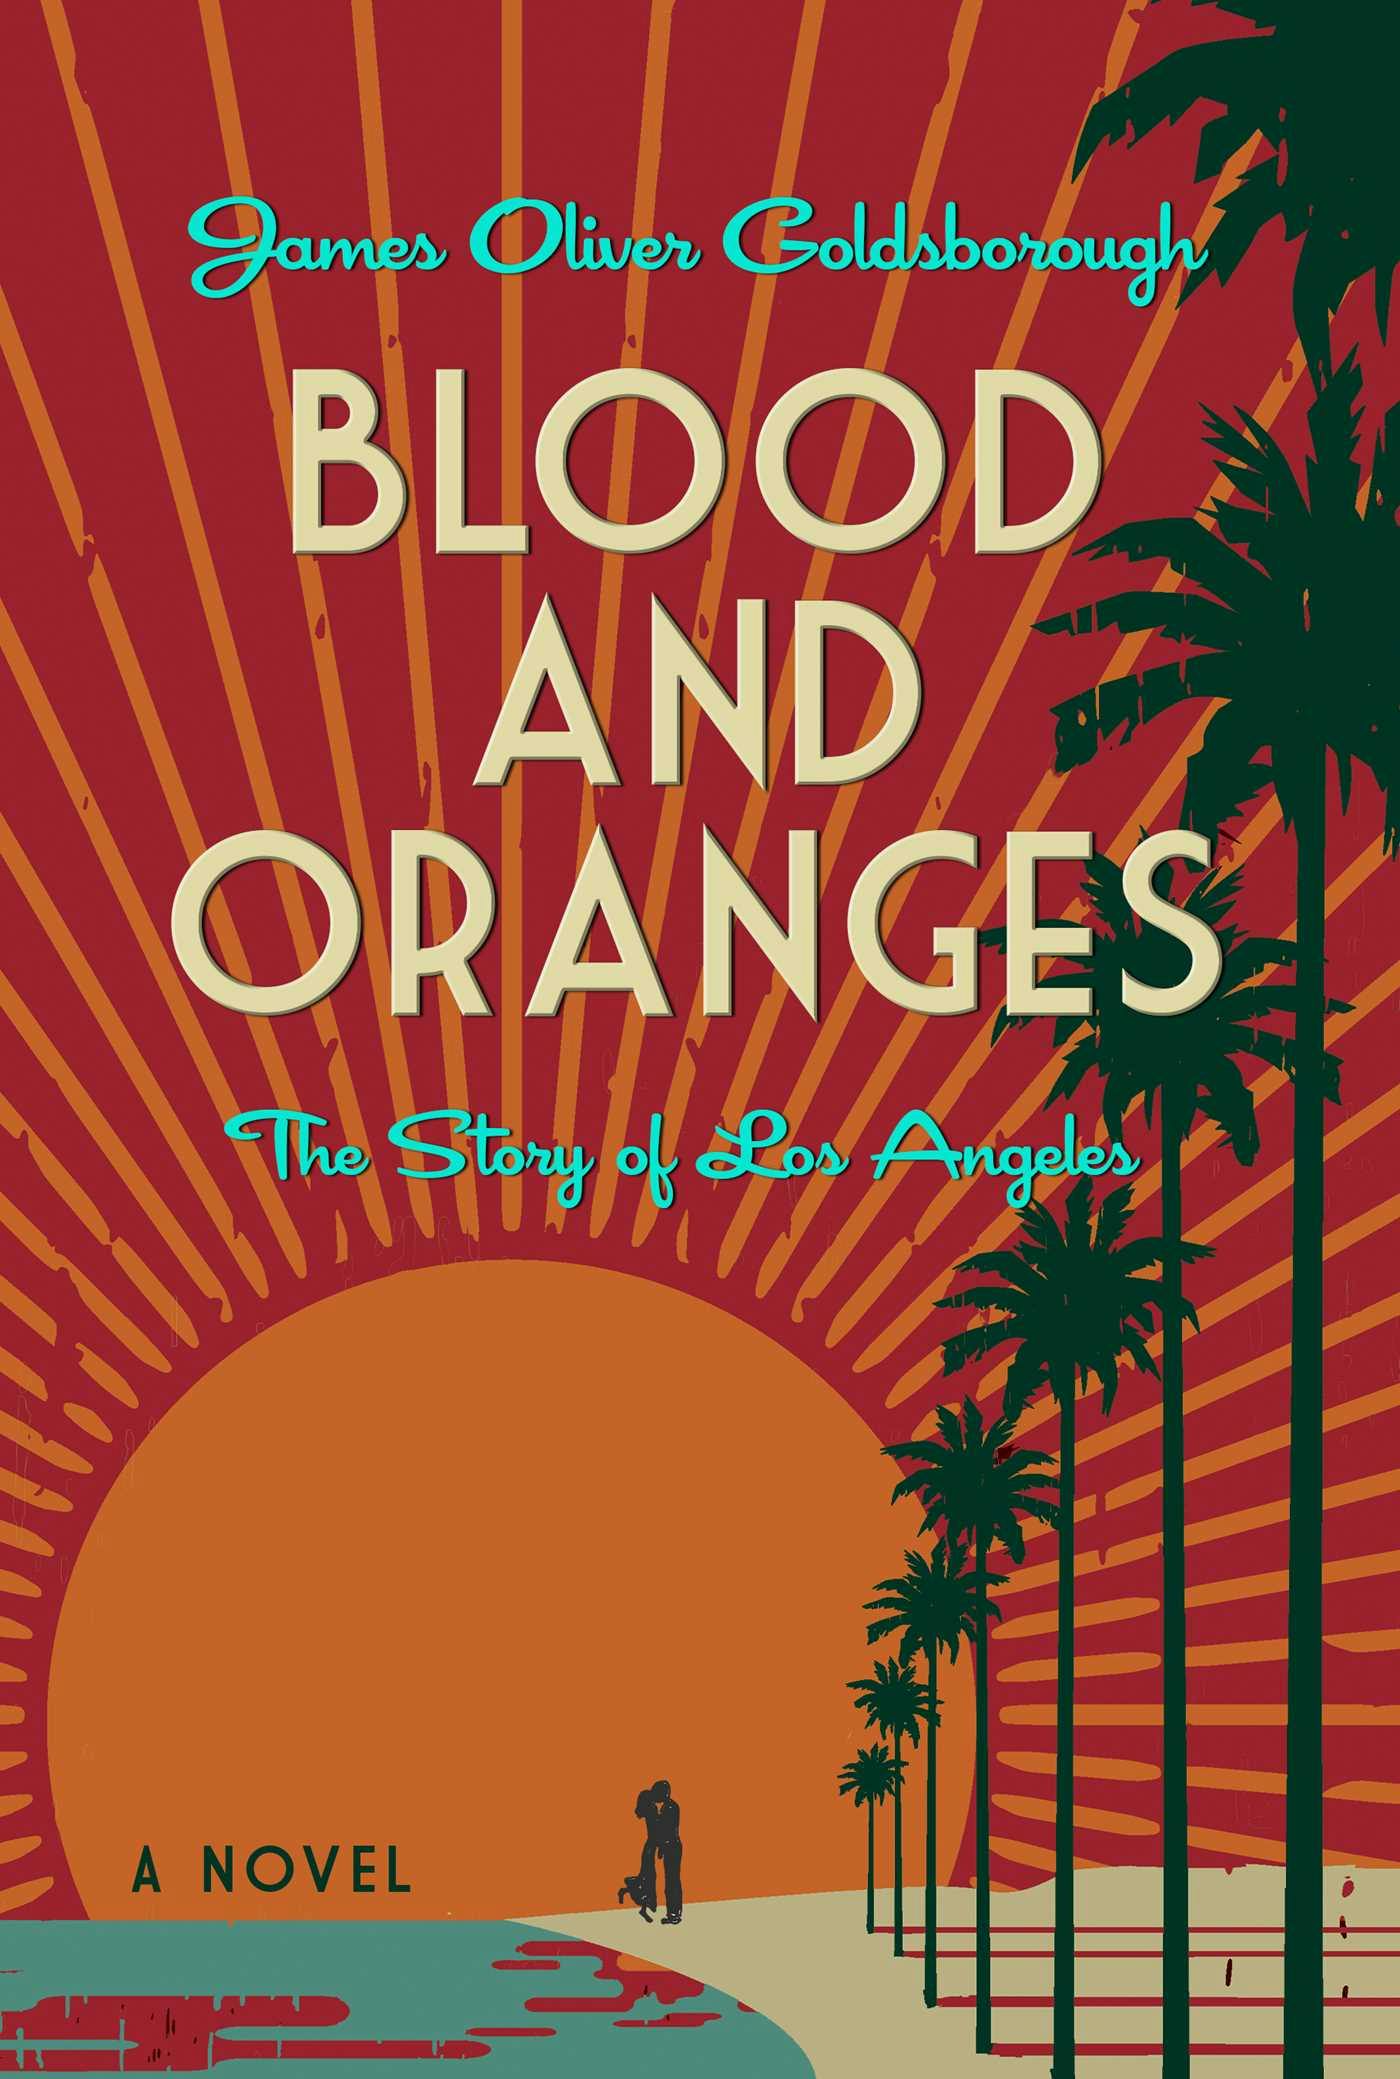 Blood and Oranges: The Story of Los Angeles: A Novel - James O. Goldsborough